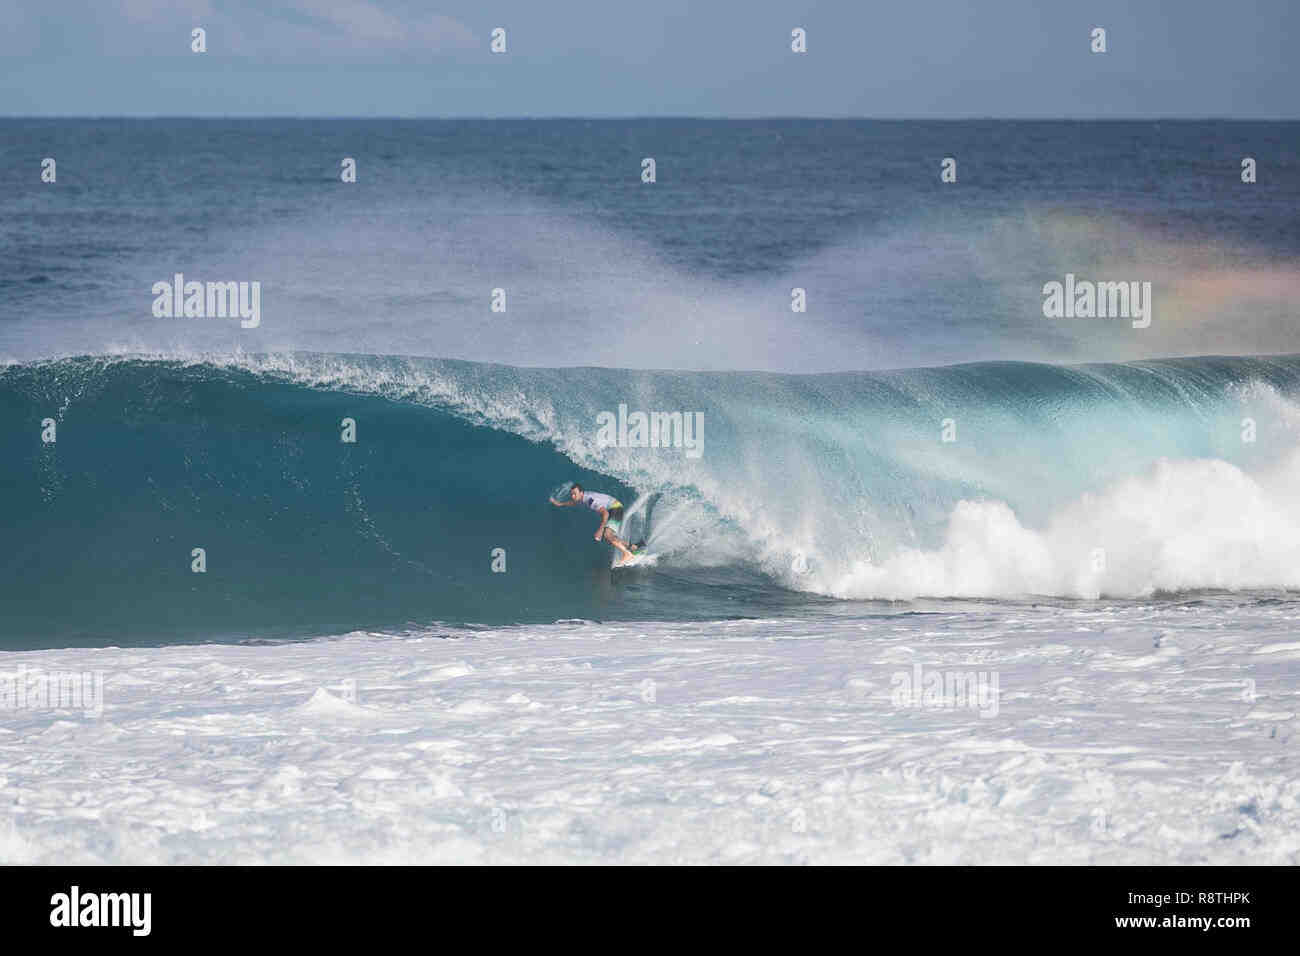 How fast are surfers going at Pipeline?